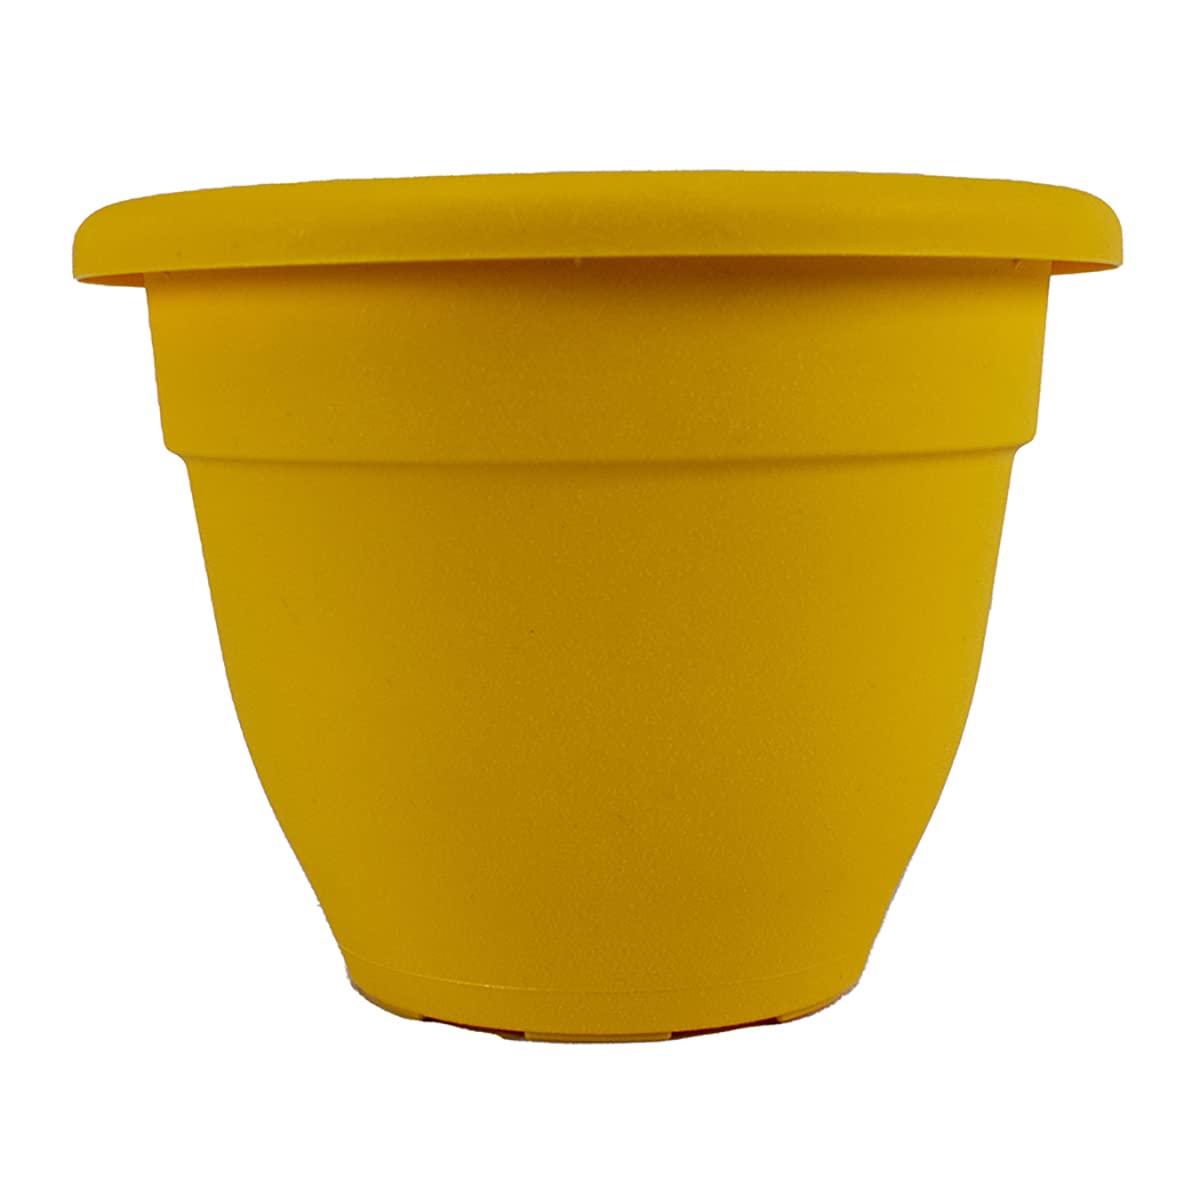 The HC Companies 16 Inch Caribbean Planter - Lightweight Indoor Outdoor Plastic Plant Pot for Herbs and Flowers, Honey